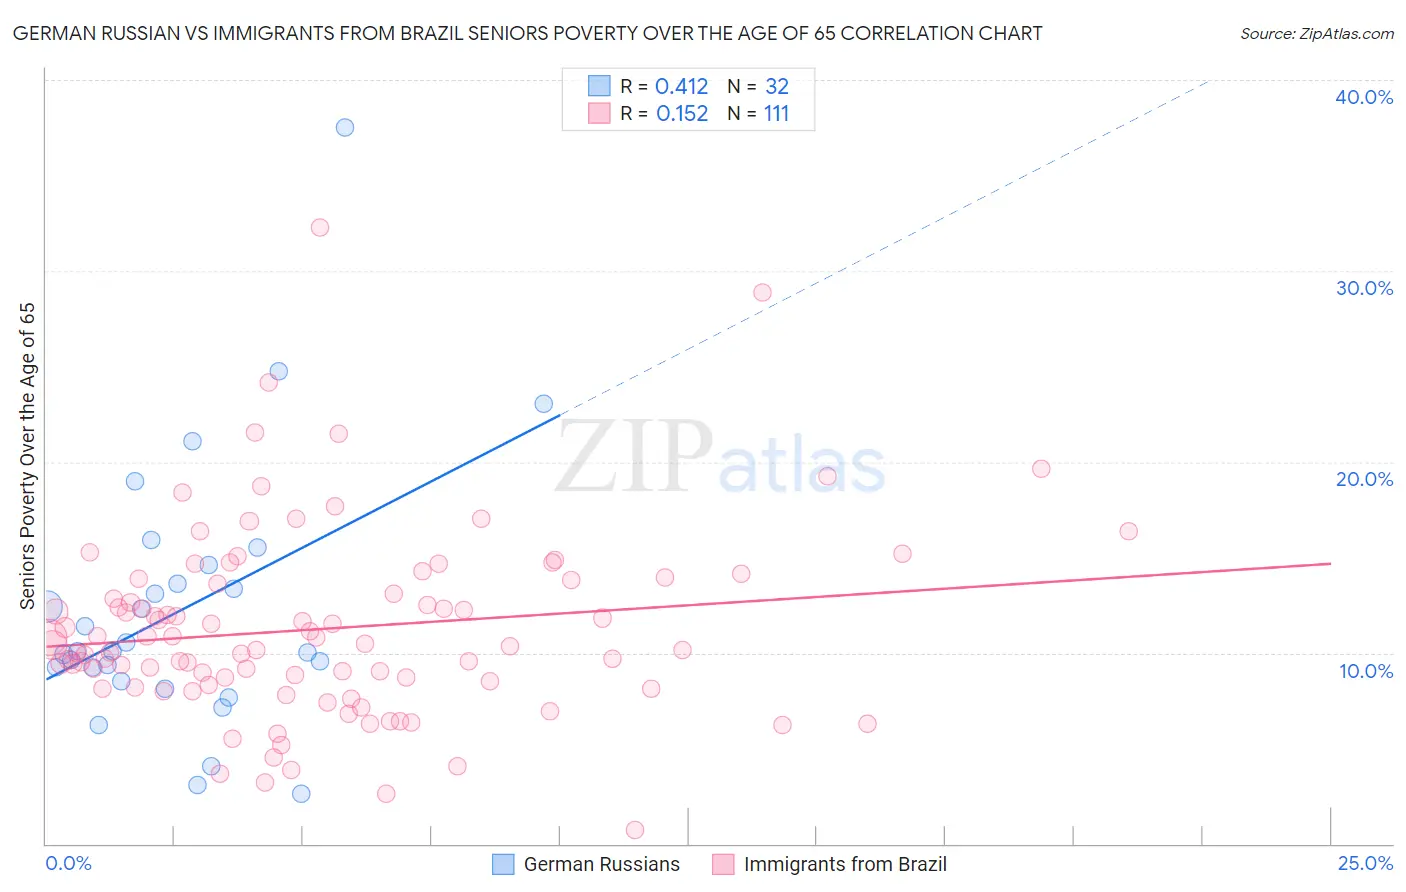 German Russian vs Immigrants from Brazil Seniors Poverty Over the Age of 65